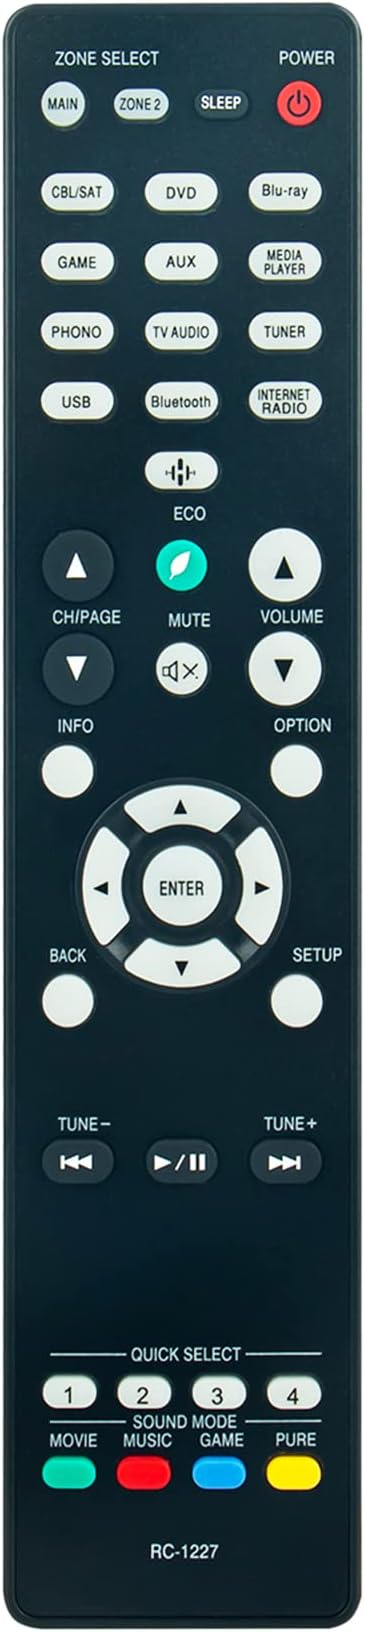 RC-1227 Replacement Remote Control Applicable for Denon AV Receiver AVR-S740H AVR-X1500H AVR-S750H AVR-X1600H AVR-X1500HOM AVRS740H AVRX1500HOM AVRX1500H AVRS750H AVRX1600H